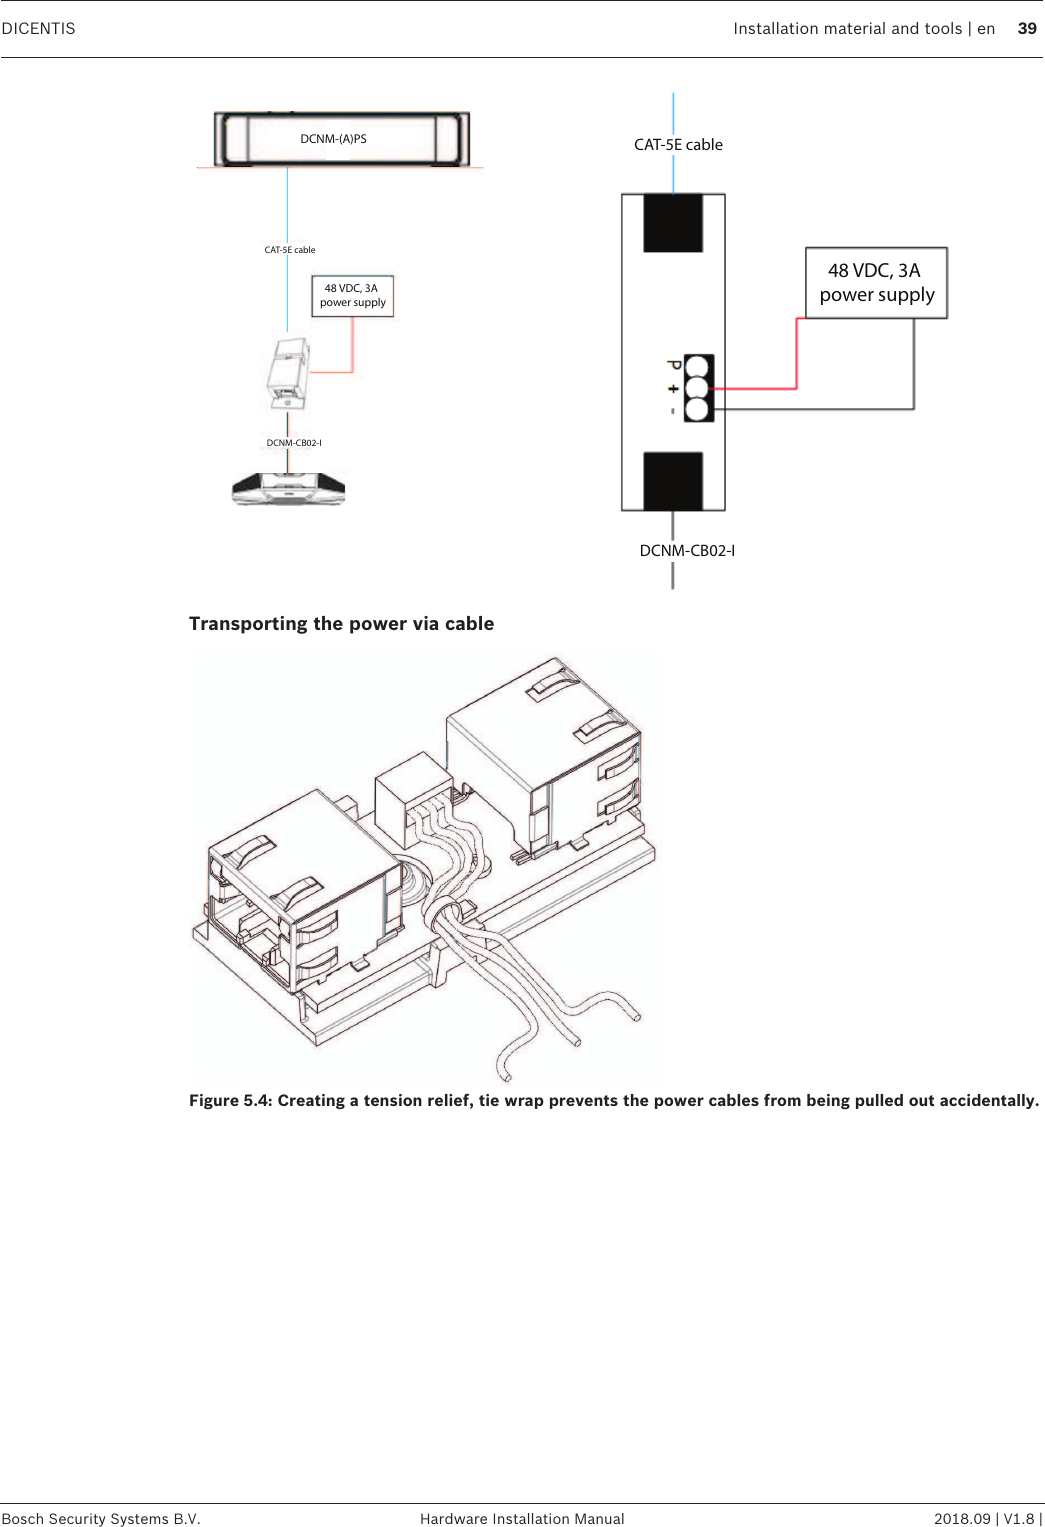 DICENTIS Installation material and tools | en 39Bosch Security Systems B.V. Hardware Installation Manual 2018.09 | V1.8 |DCNM-(A)PSCAT-5E cableDCNM-CB02-I  48 VDC, 3Apower supplyCAT-5E cableDCNM-CB02-I  48 VDC, 3Apower supplyTransporting the power via cableFigure5.4: Creating a tension relief, tie wrap prevents the power cables from being pulled out accidentally.